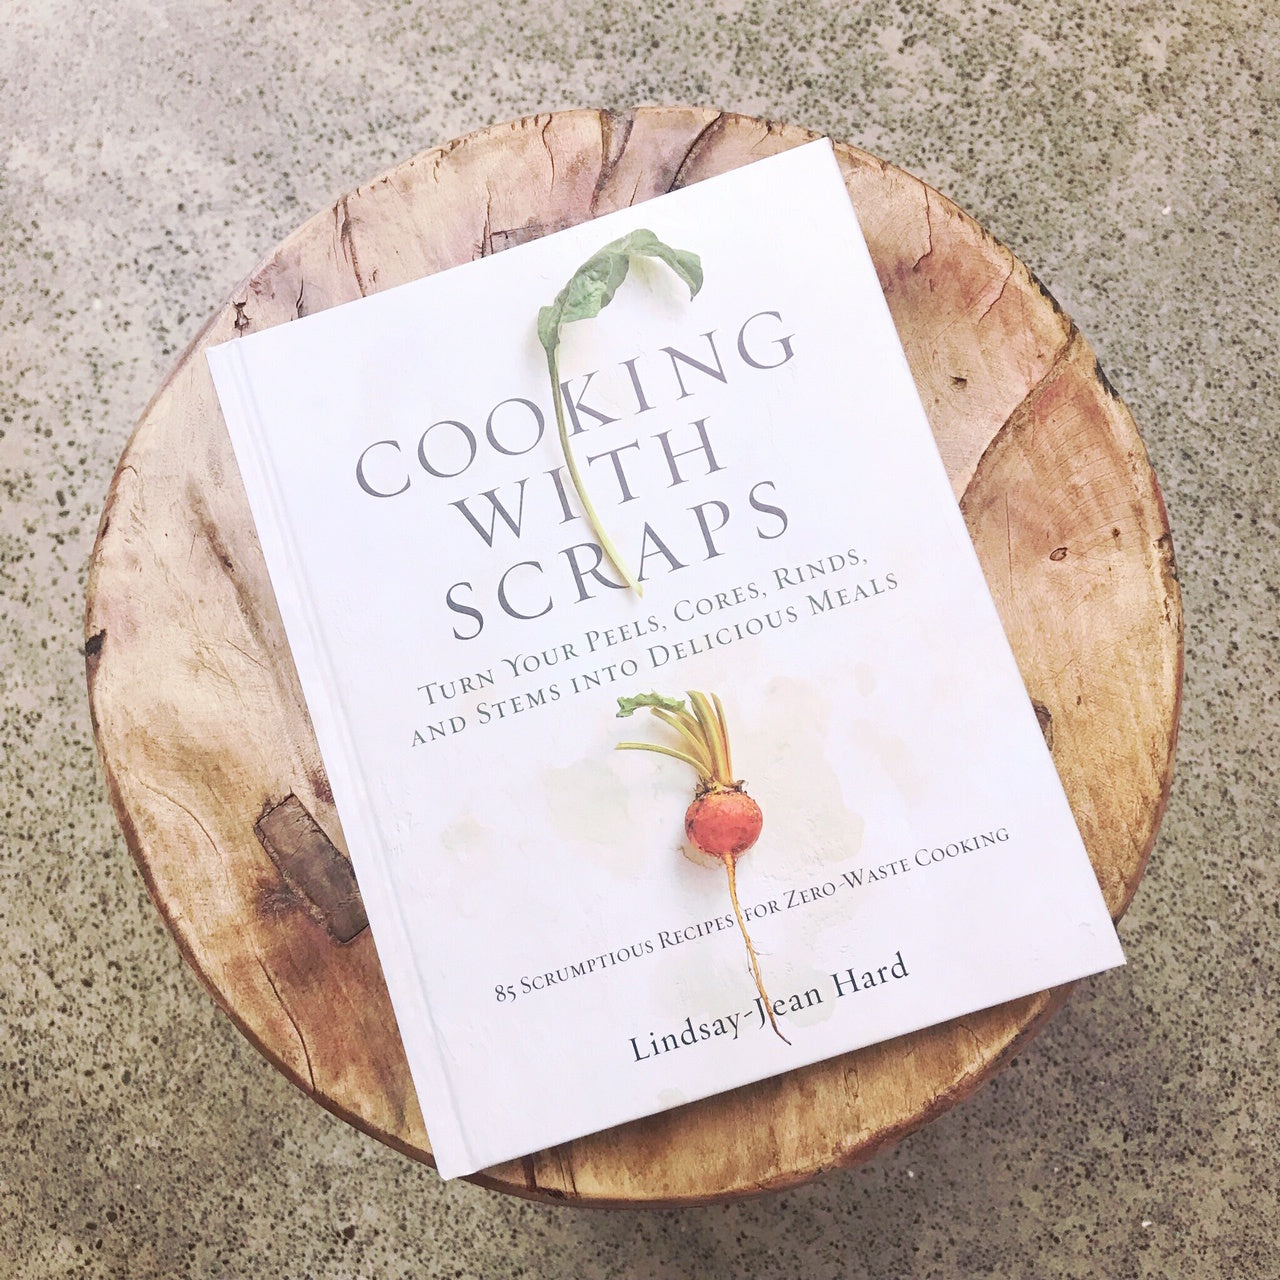 Cooking With Scraps